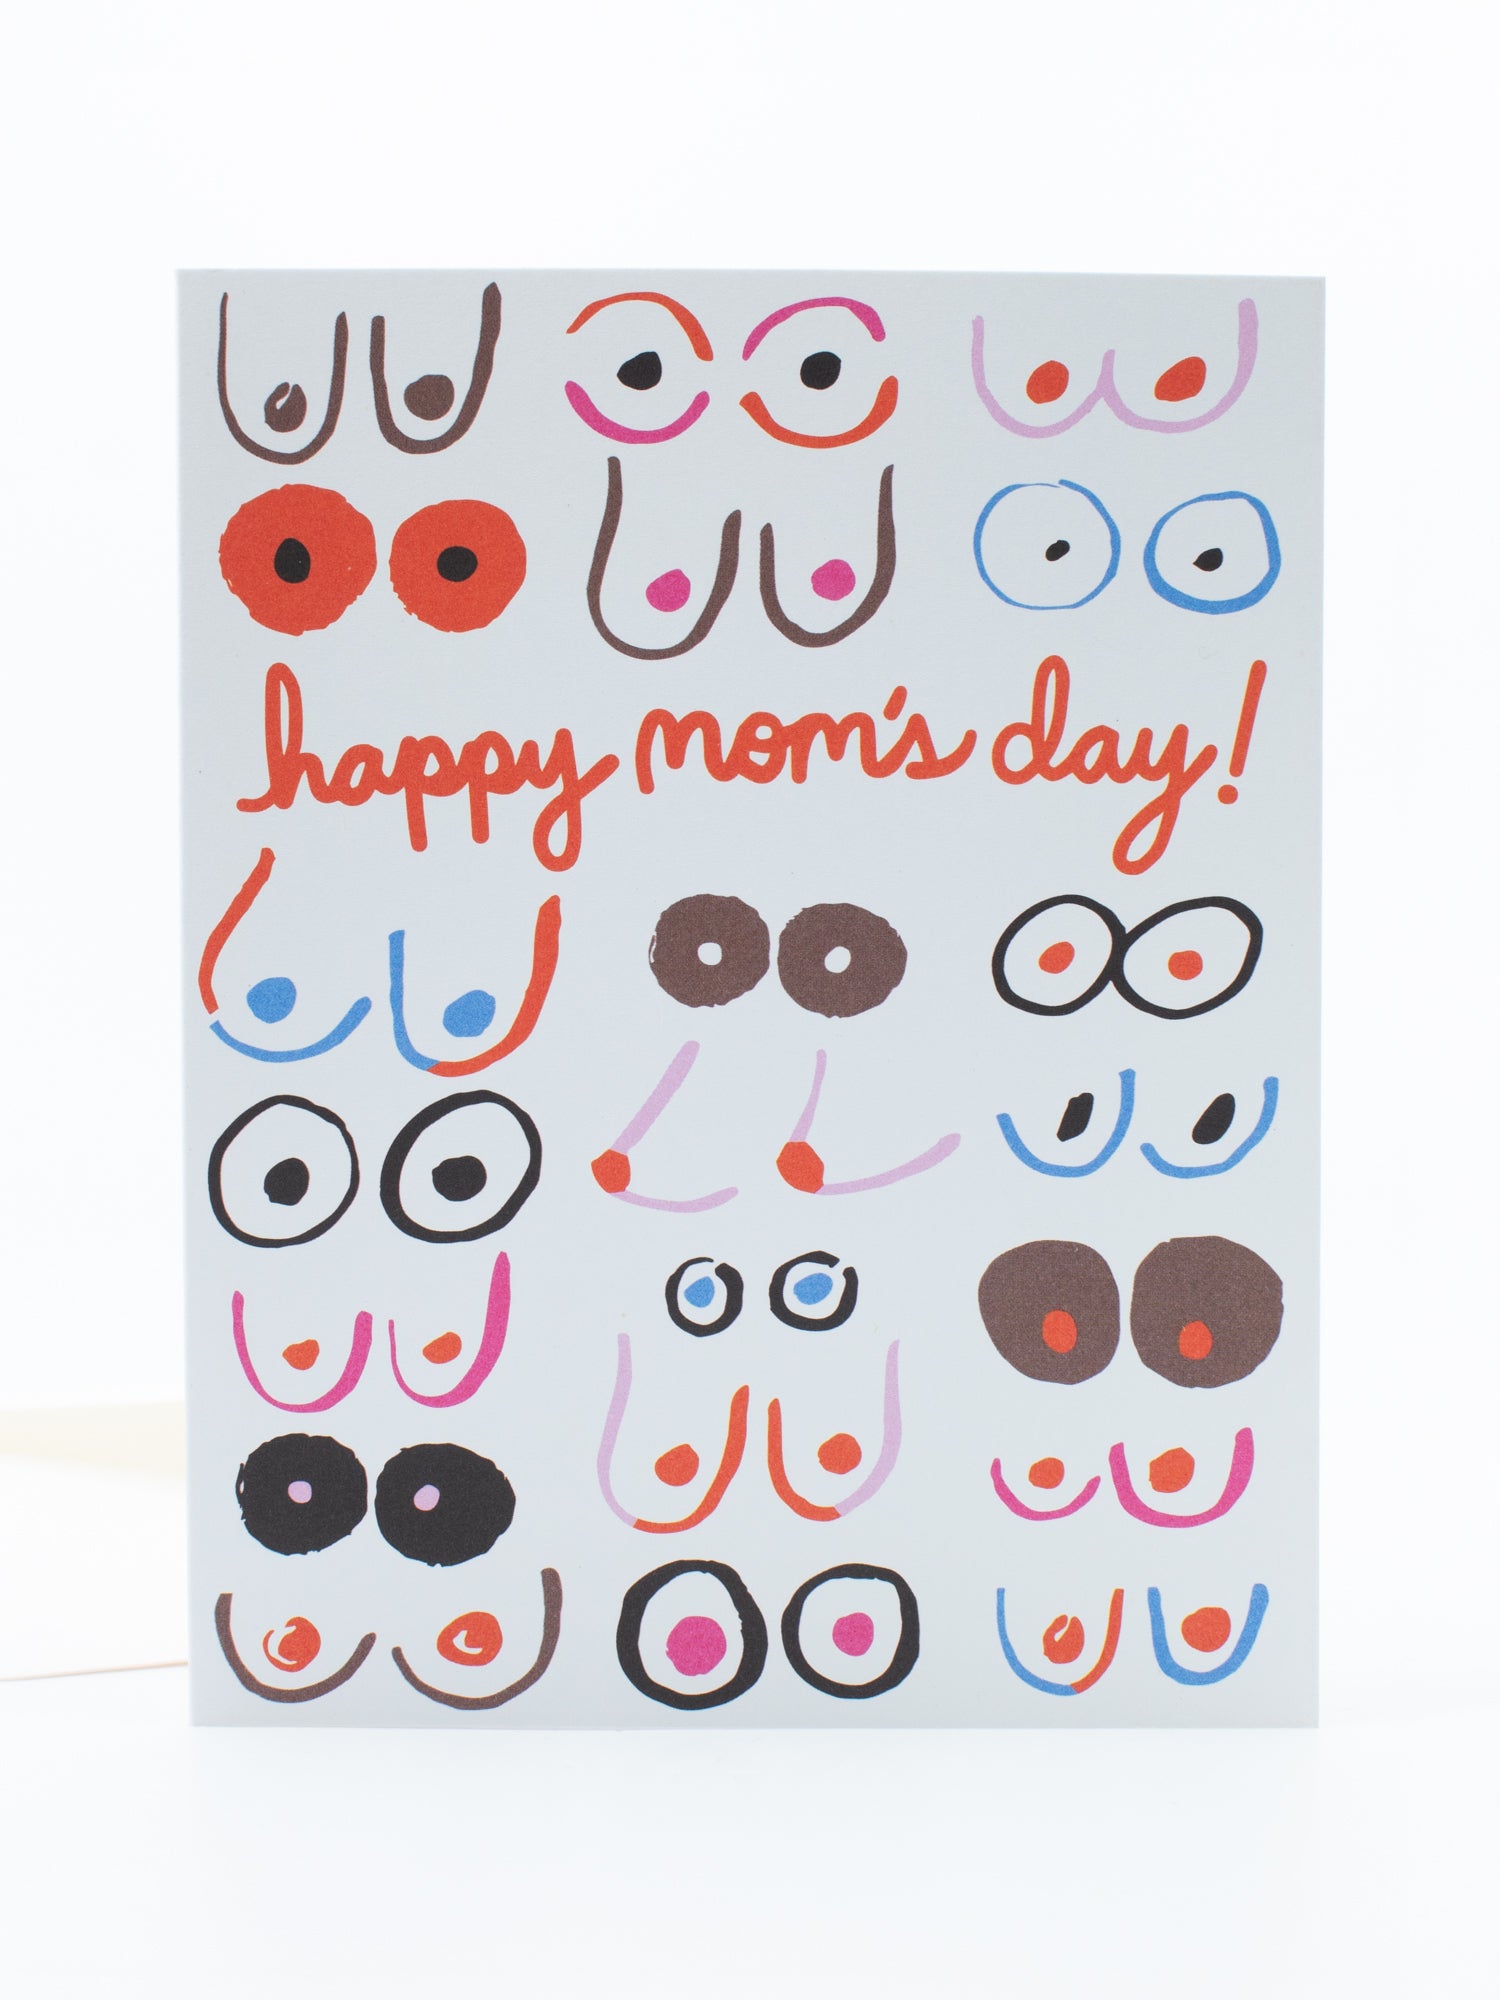 The Found Greeting Card Boobs Happy Mom's Day